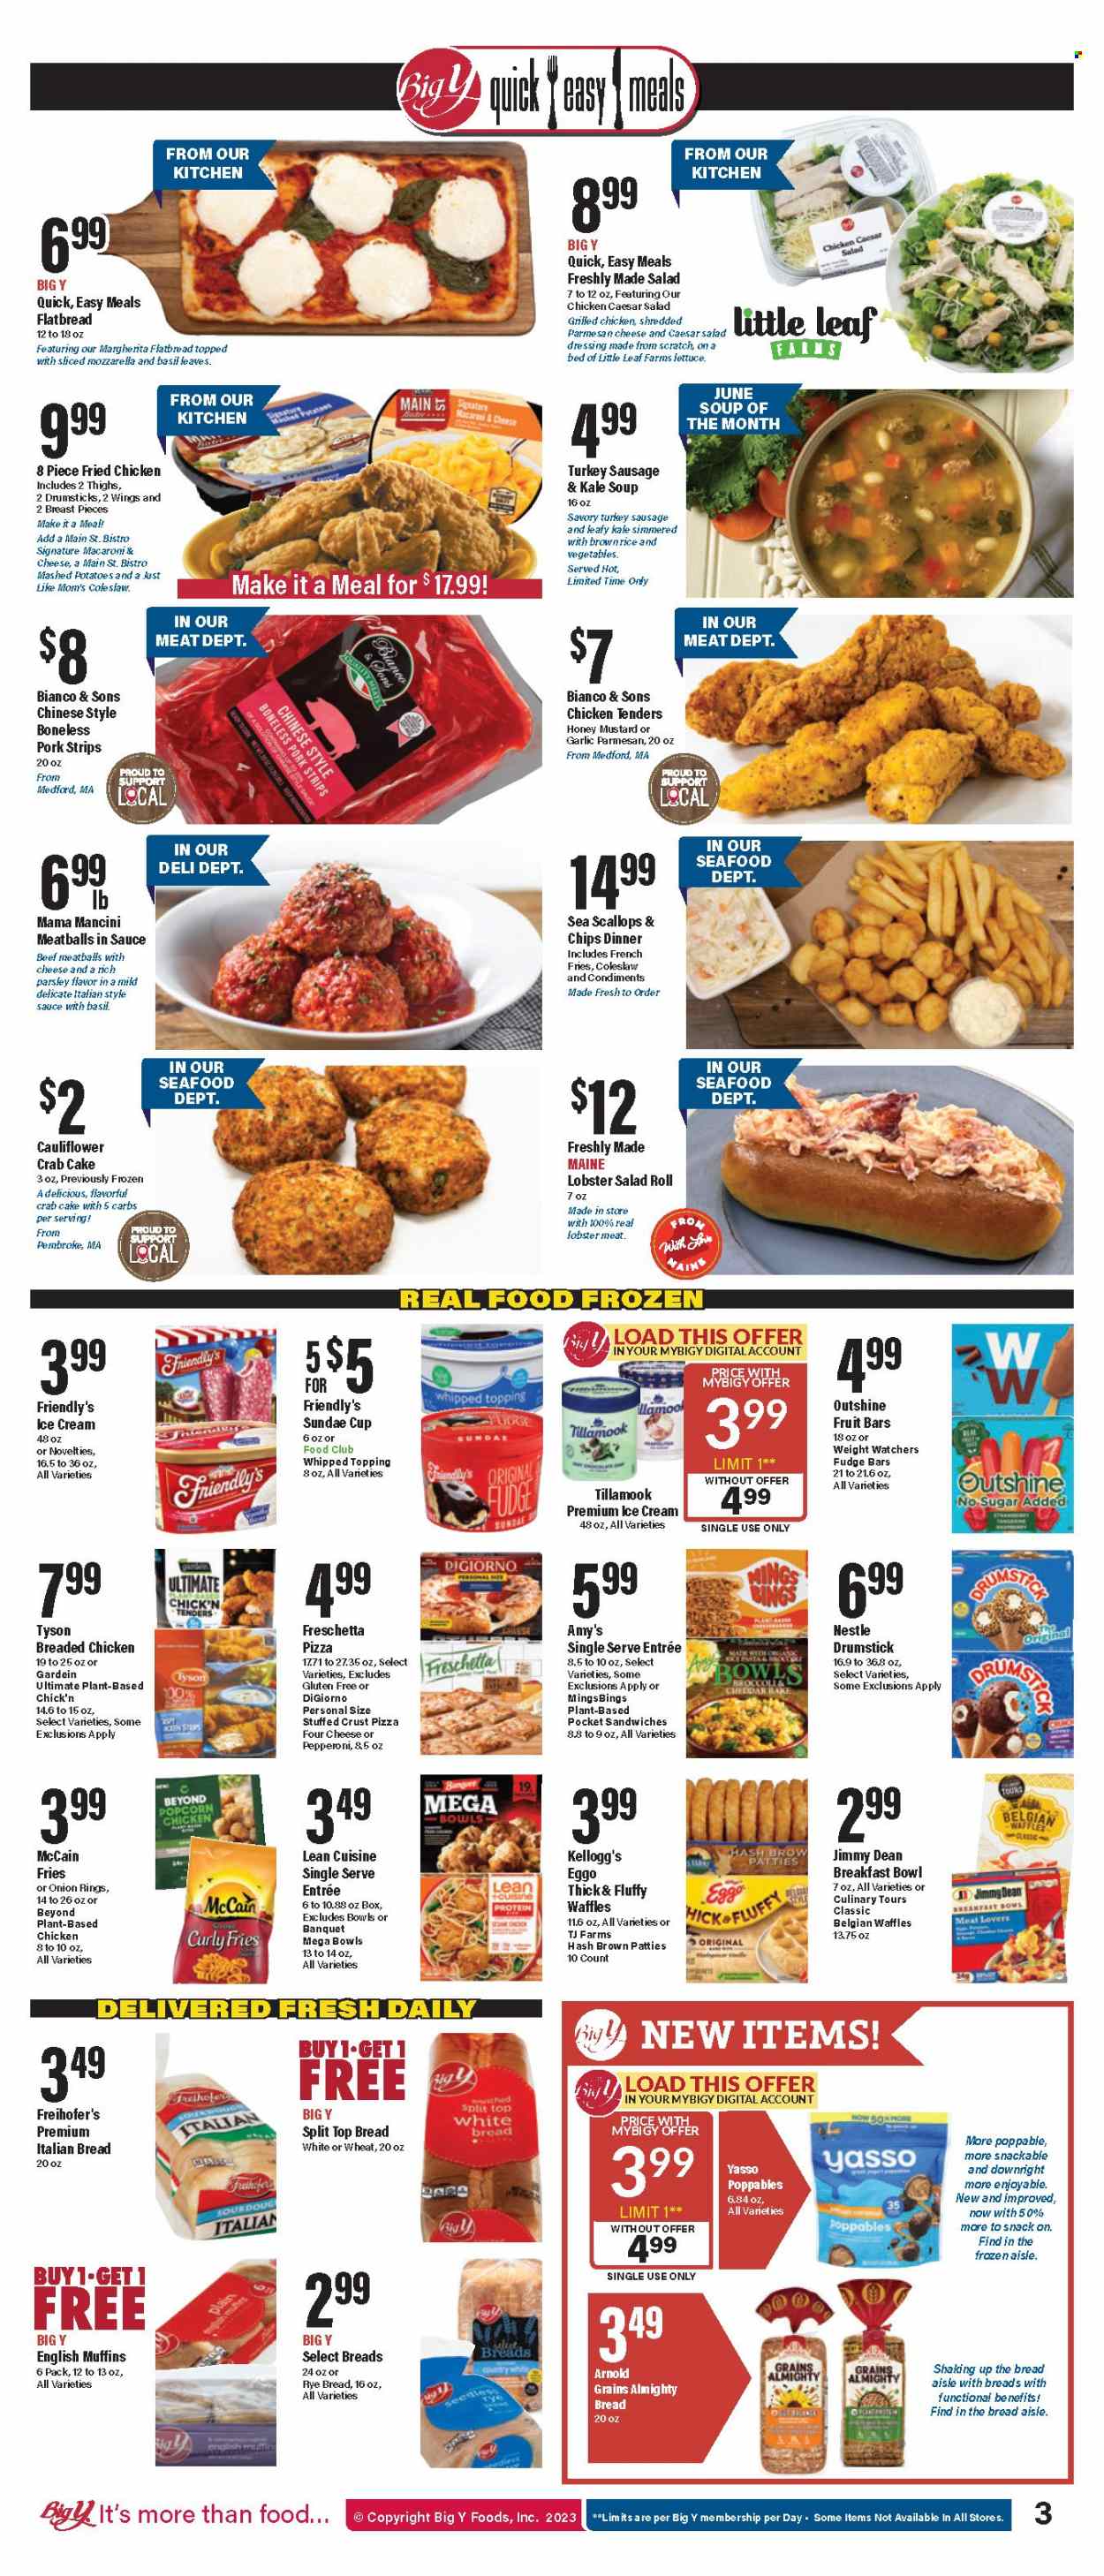 thumbnail - Big Y Flyer - 06/08/2023 - 06/14/2023 - Sales products - english muffins, white bread, waffles, broccoli, parsley, lettuce, lobster, scallops, seafood, crab, coleslaw, macaroni & cheese, mashed potatoes, pizza, onion rings, chicken tenders, meatballs, soup, fried chicken, breakfast bowl, Lean Cuisine, Jimmy Dean, ready meal, breaded chicken, snack, sausage, ice cream, Friendly's Ice Cream, fruit bar, ice cones, strips, curly potato fries, McCain, potato fries, french fries, fudge, Nestlé, Kellogg's, topping, brown rice, rice, mustard, salad dressing, honey mustard, dressing, turkey. Page 5.